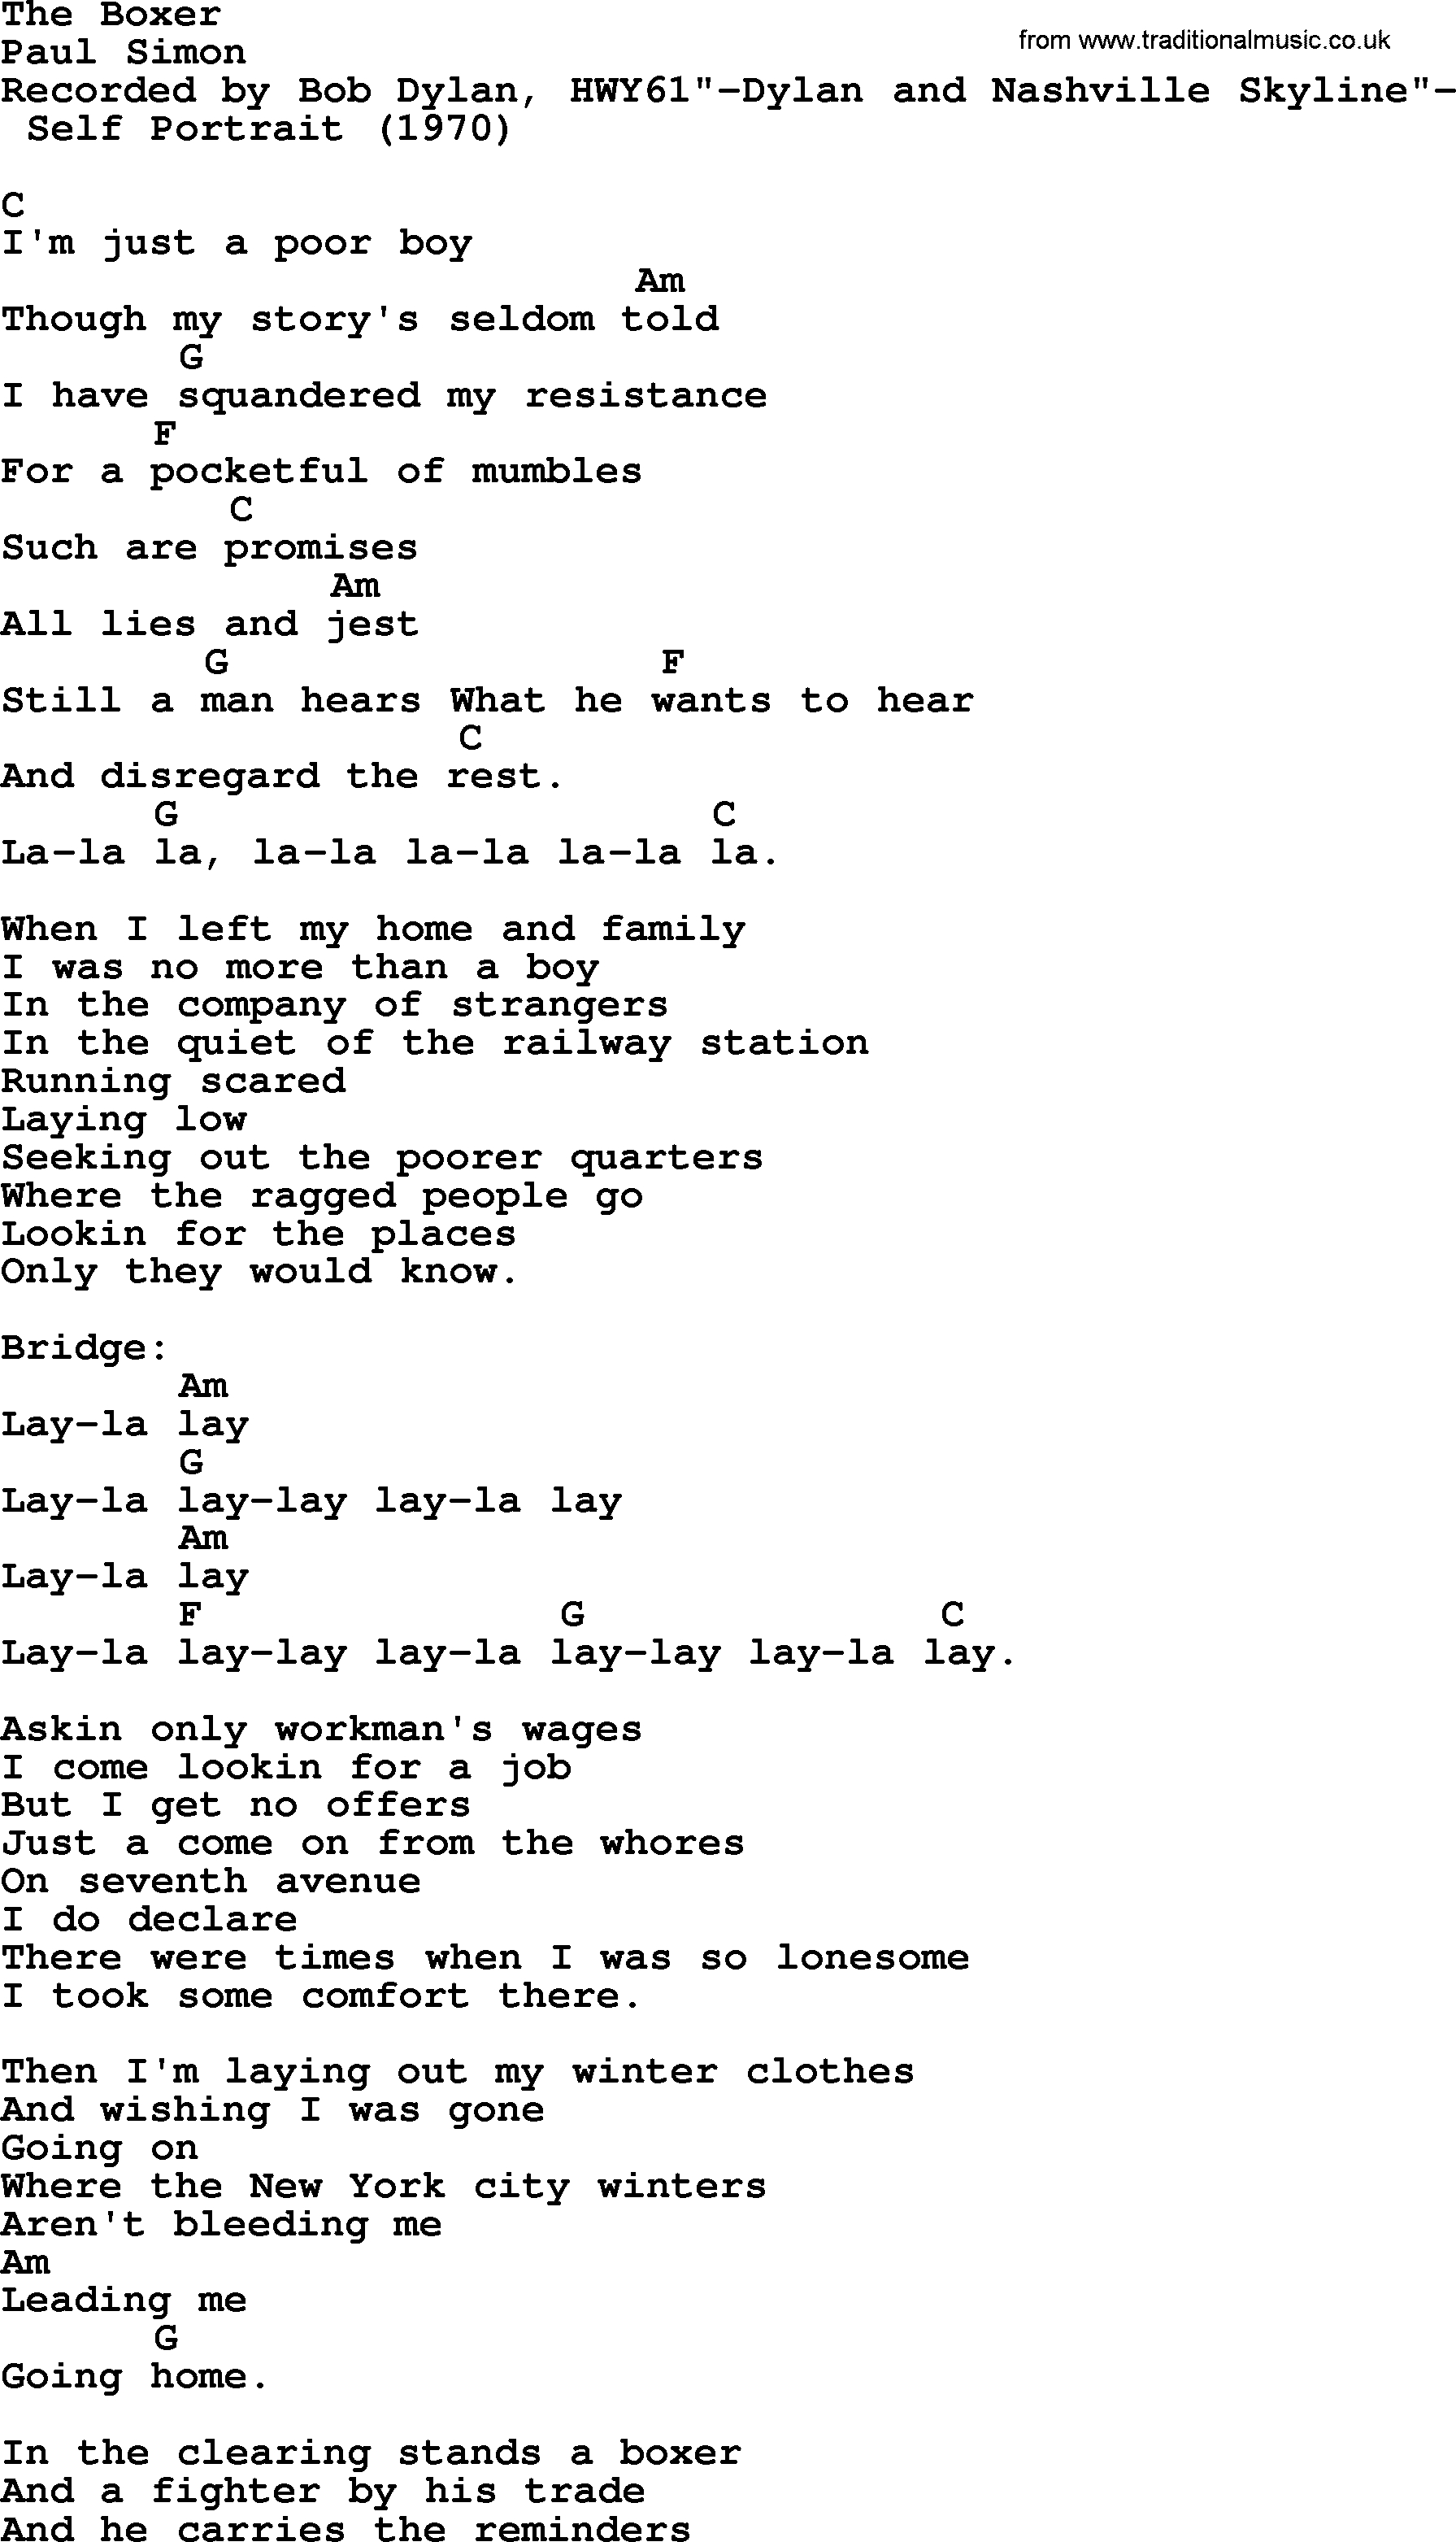 The Boxer Chords Bob Dylan Song The Boxer Lyrics And Chords